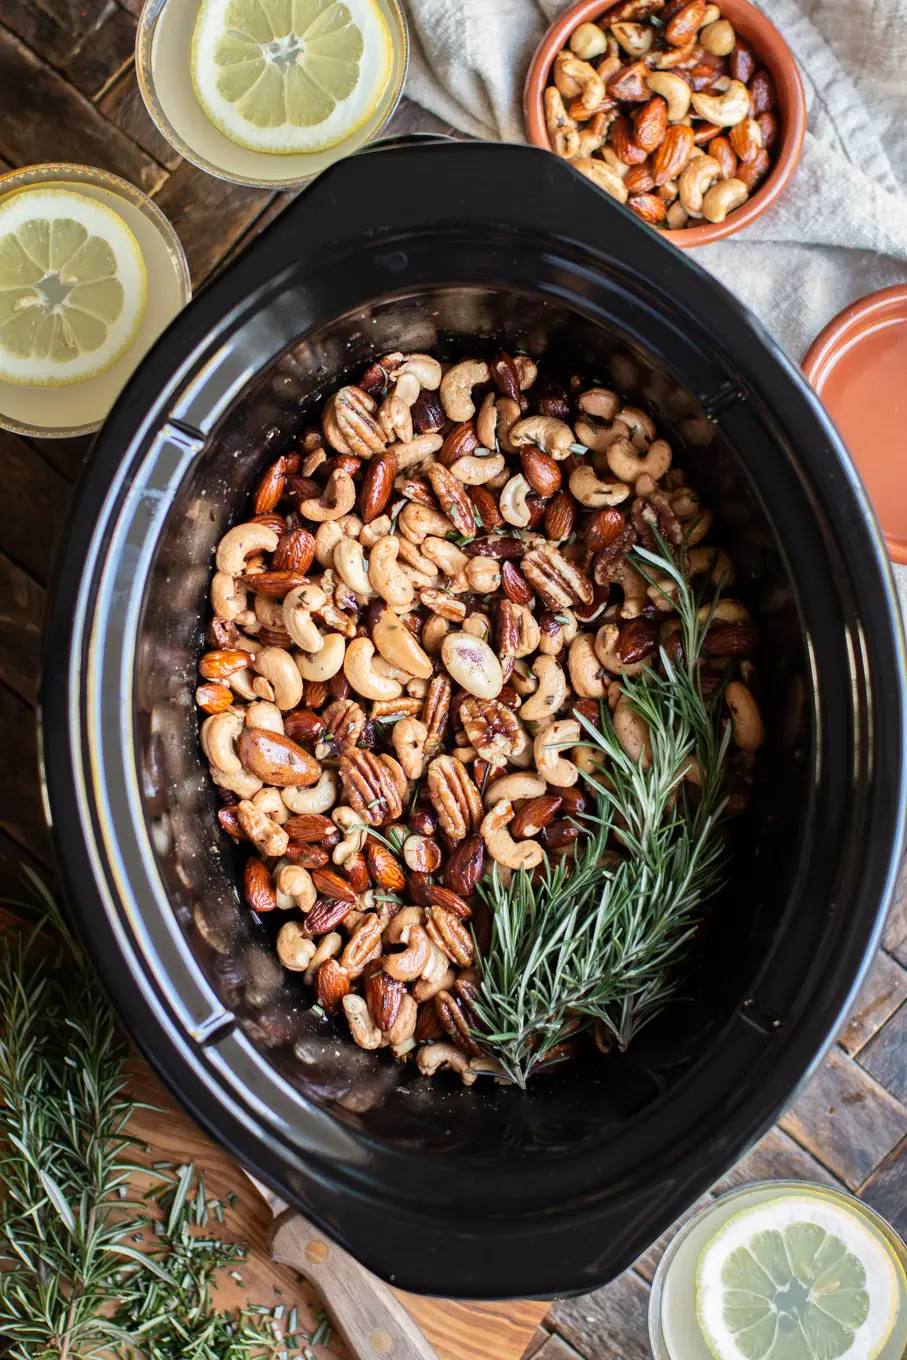 Crockpot filled with mixed nuts and fresh rosemary, to make Union Square Bar Nuts.